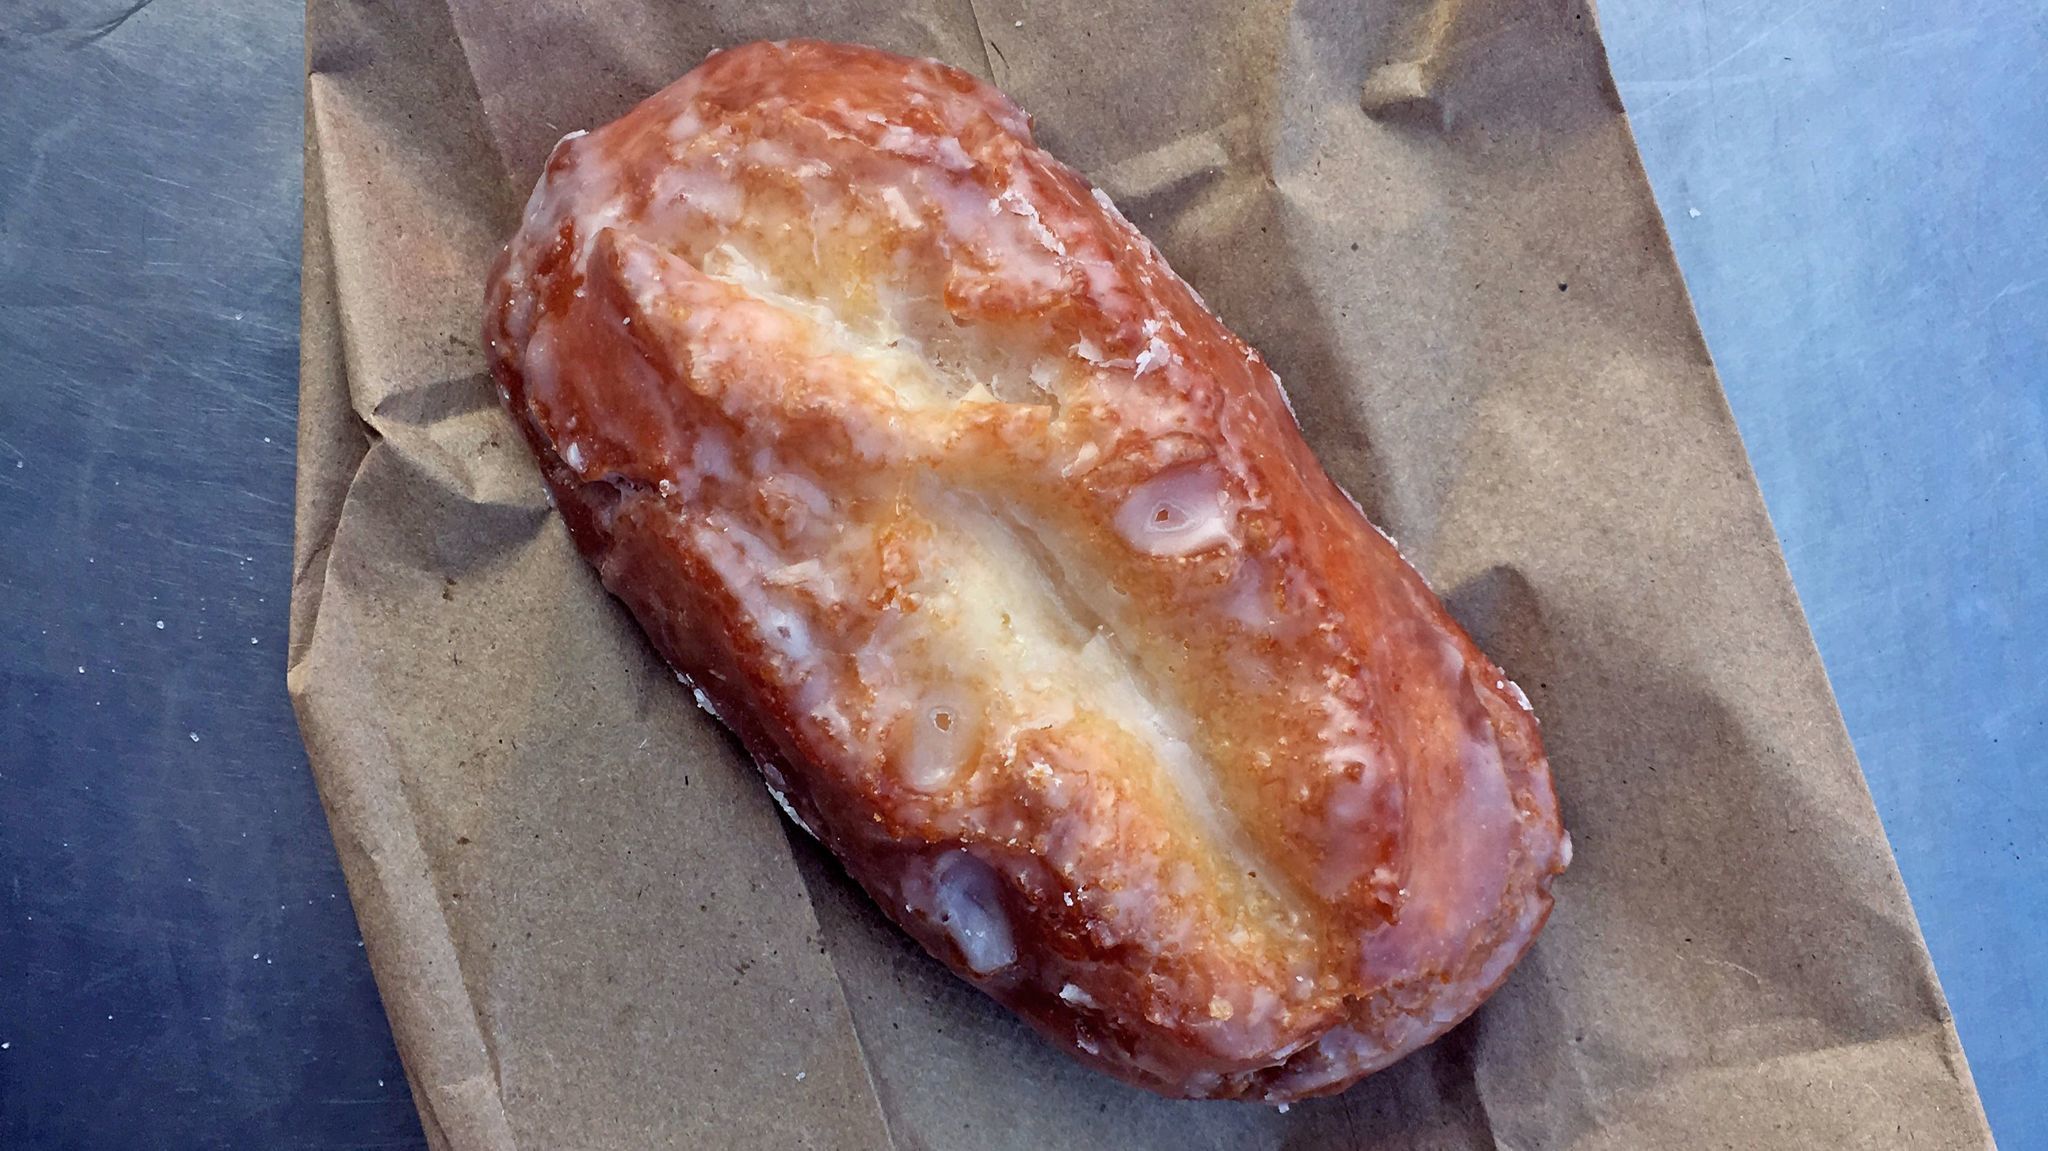 Buttermilk bar from Primo's Donuts.